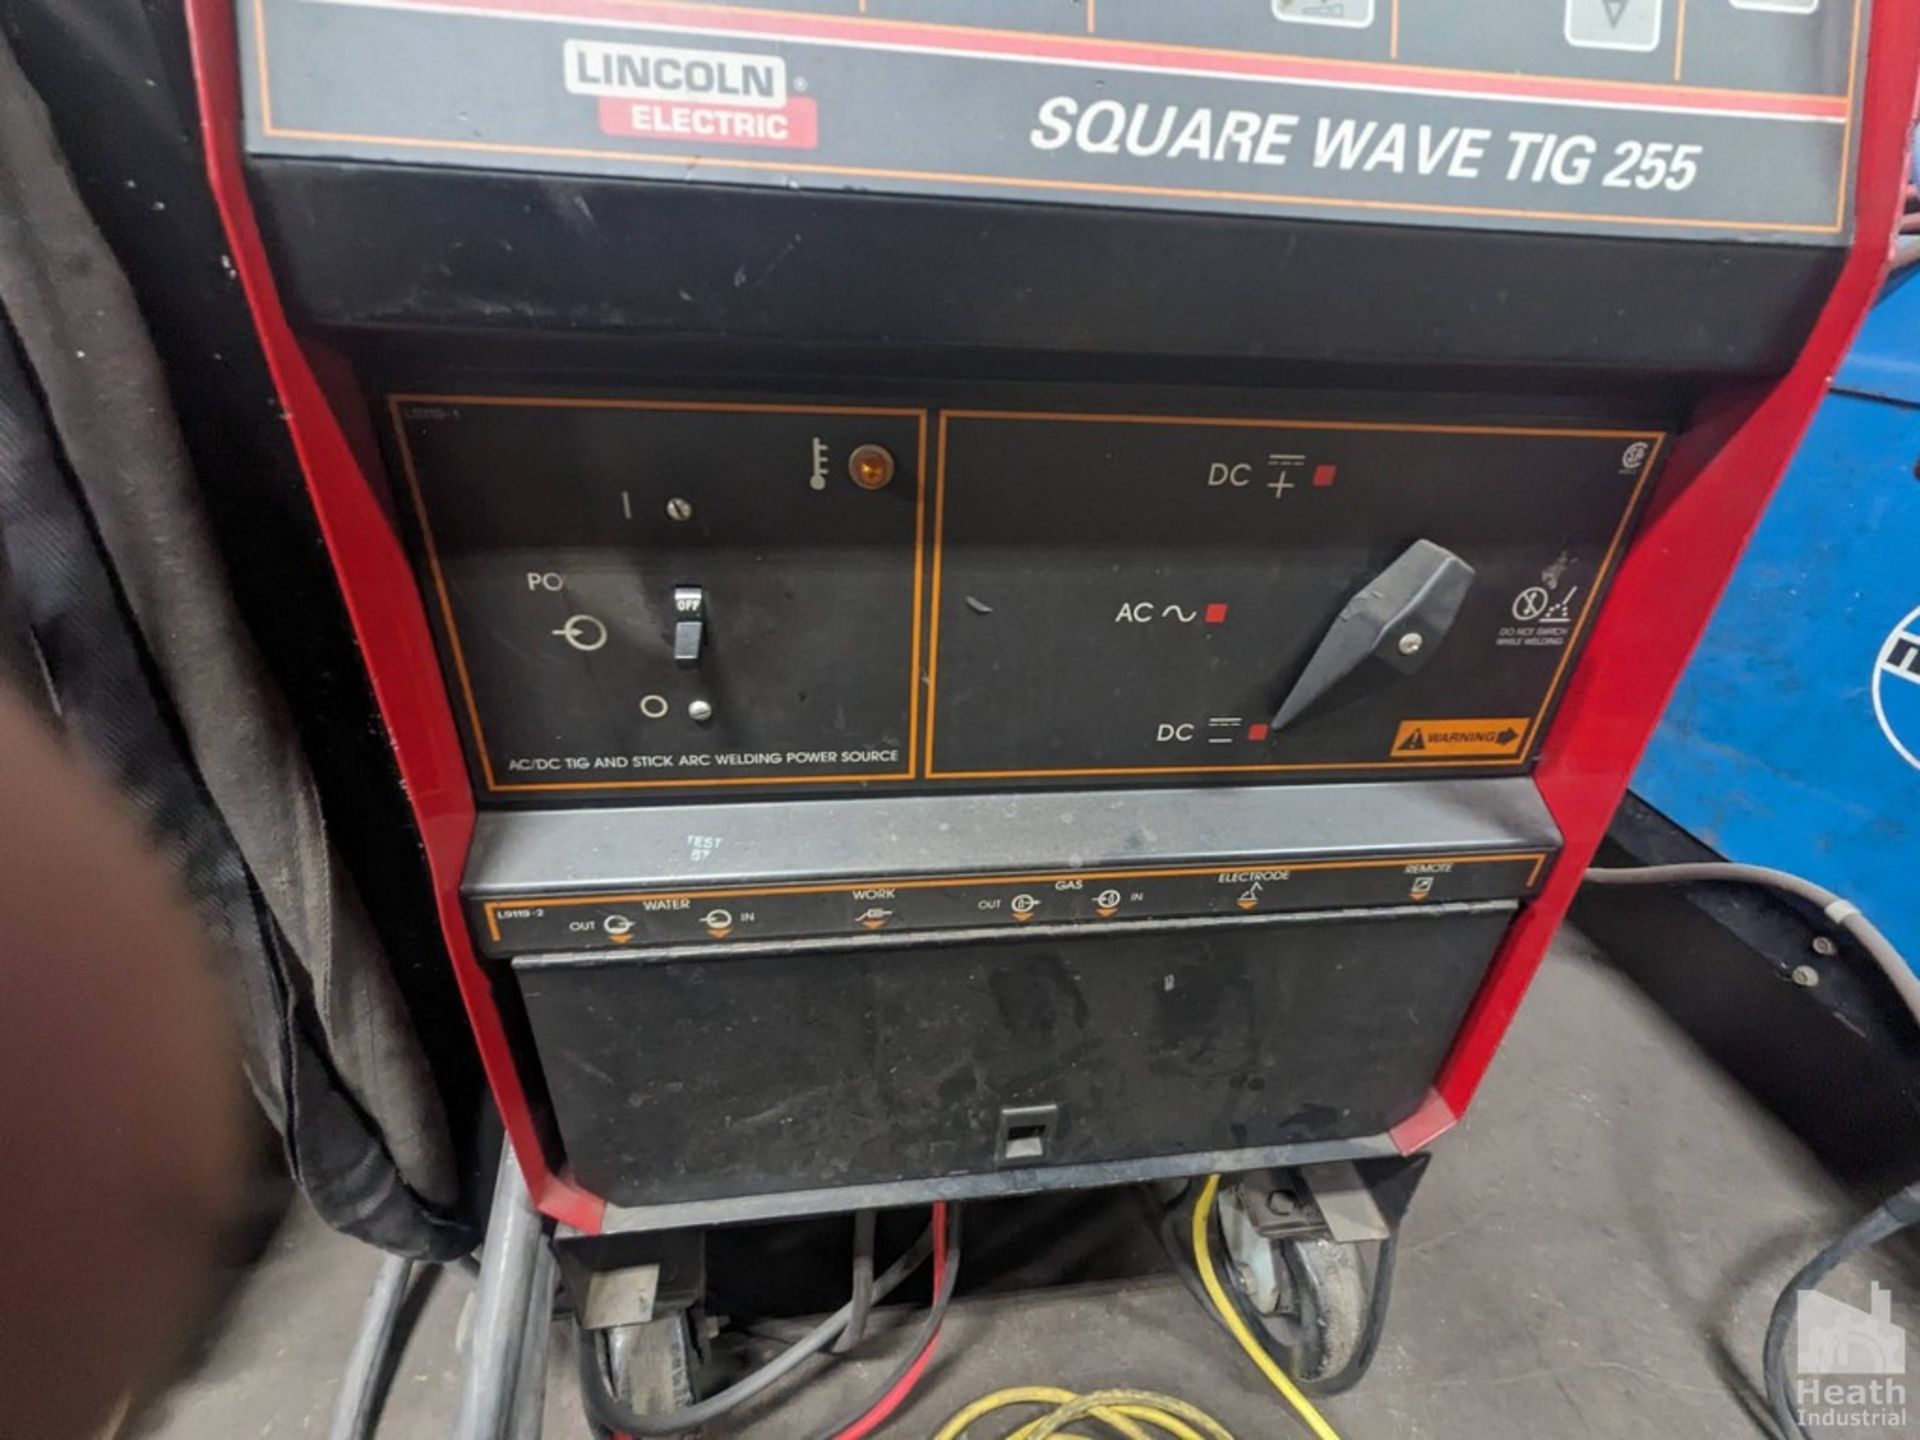 LINCOLN ELECTRIC SQUARE WAVE TIG 255 WELDER 10022-U1960105125 WITH TWECO TC900 WATER COOLER, FOOT - Bild 4 aus 6